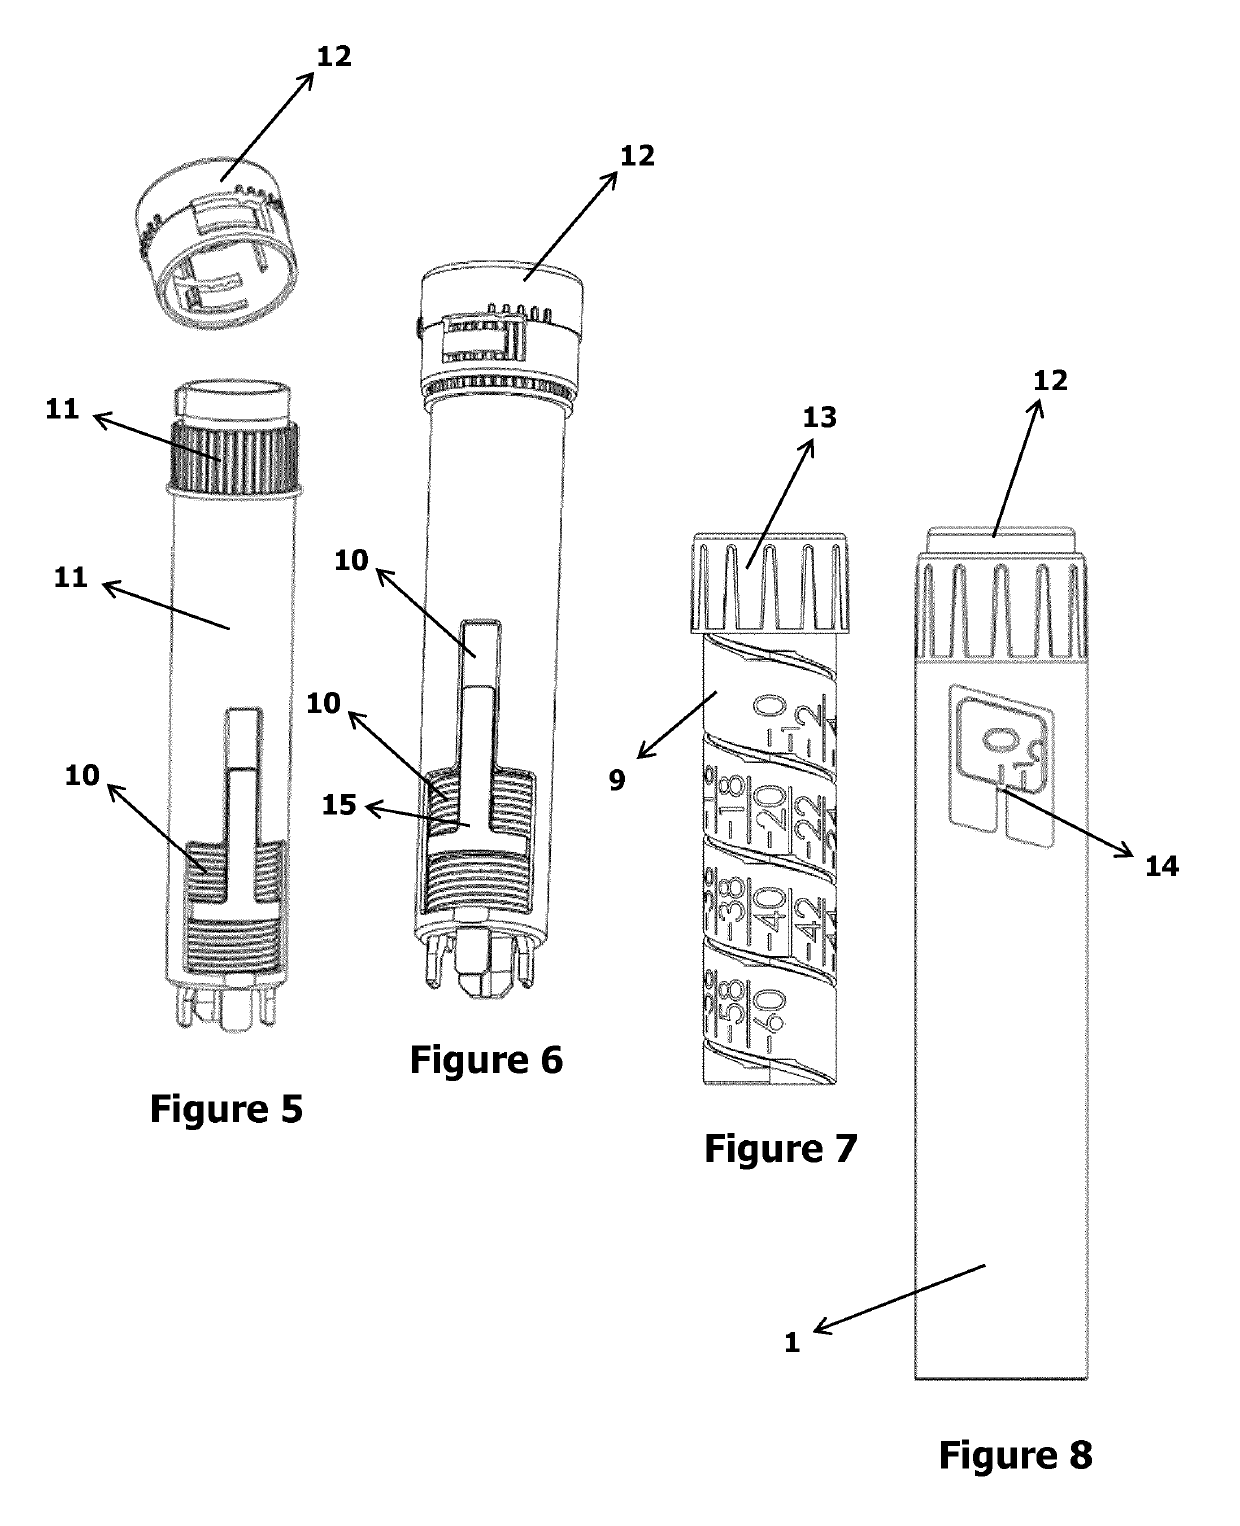 Drug delivery device for liquid pharmaceuticals